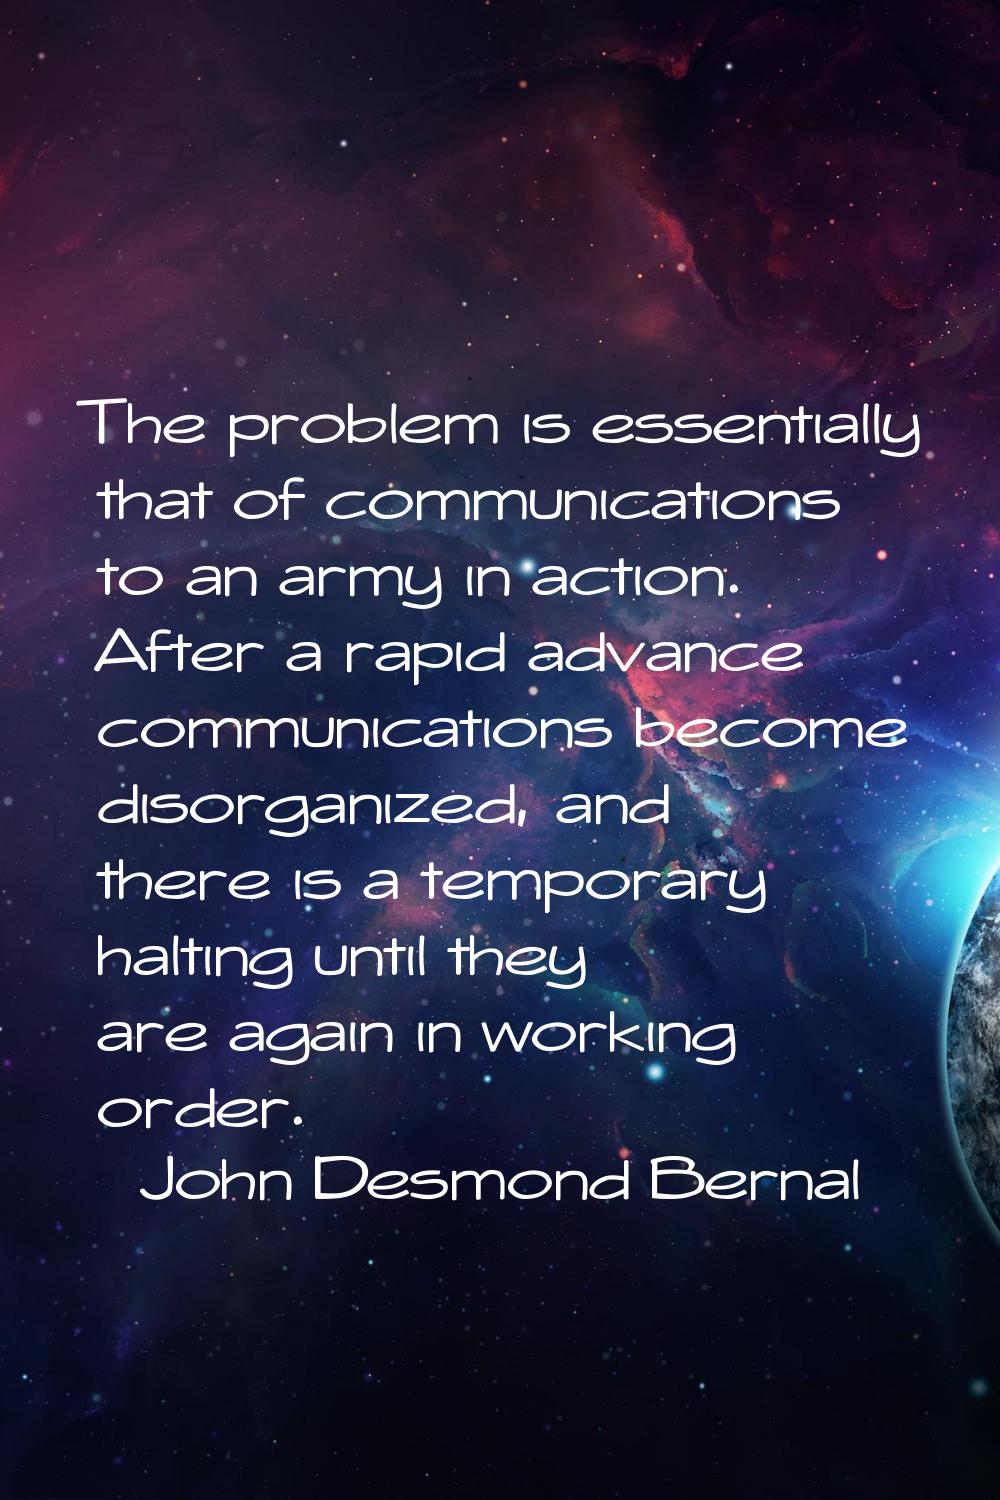 The problem is essentially that of communications to an army in action. After a rapid advance commu